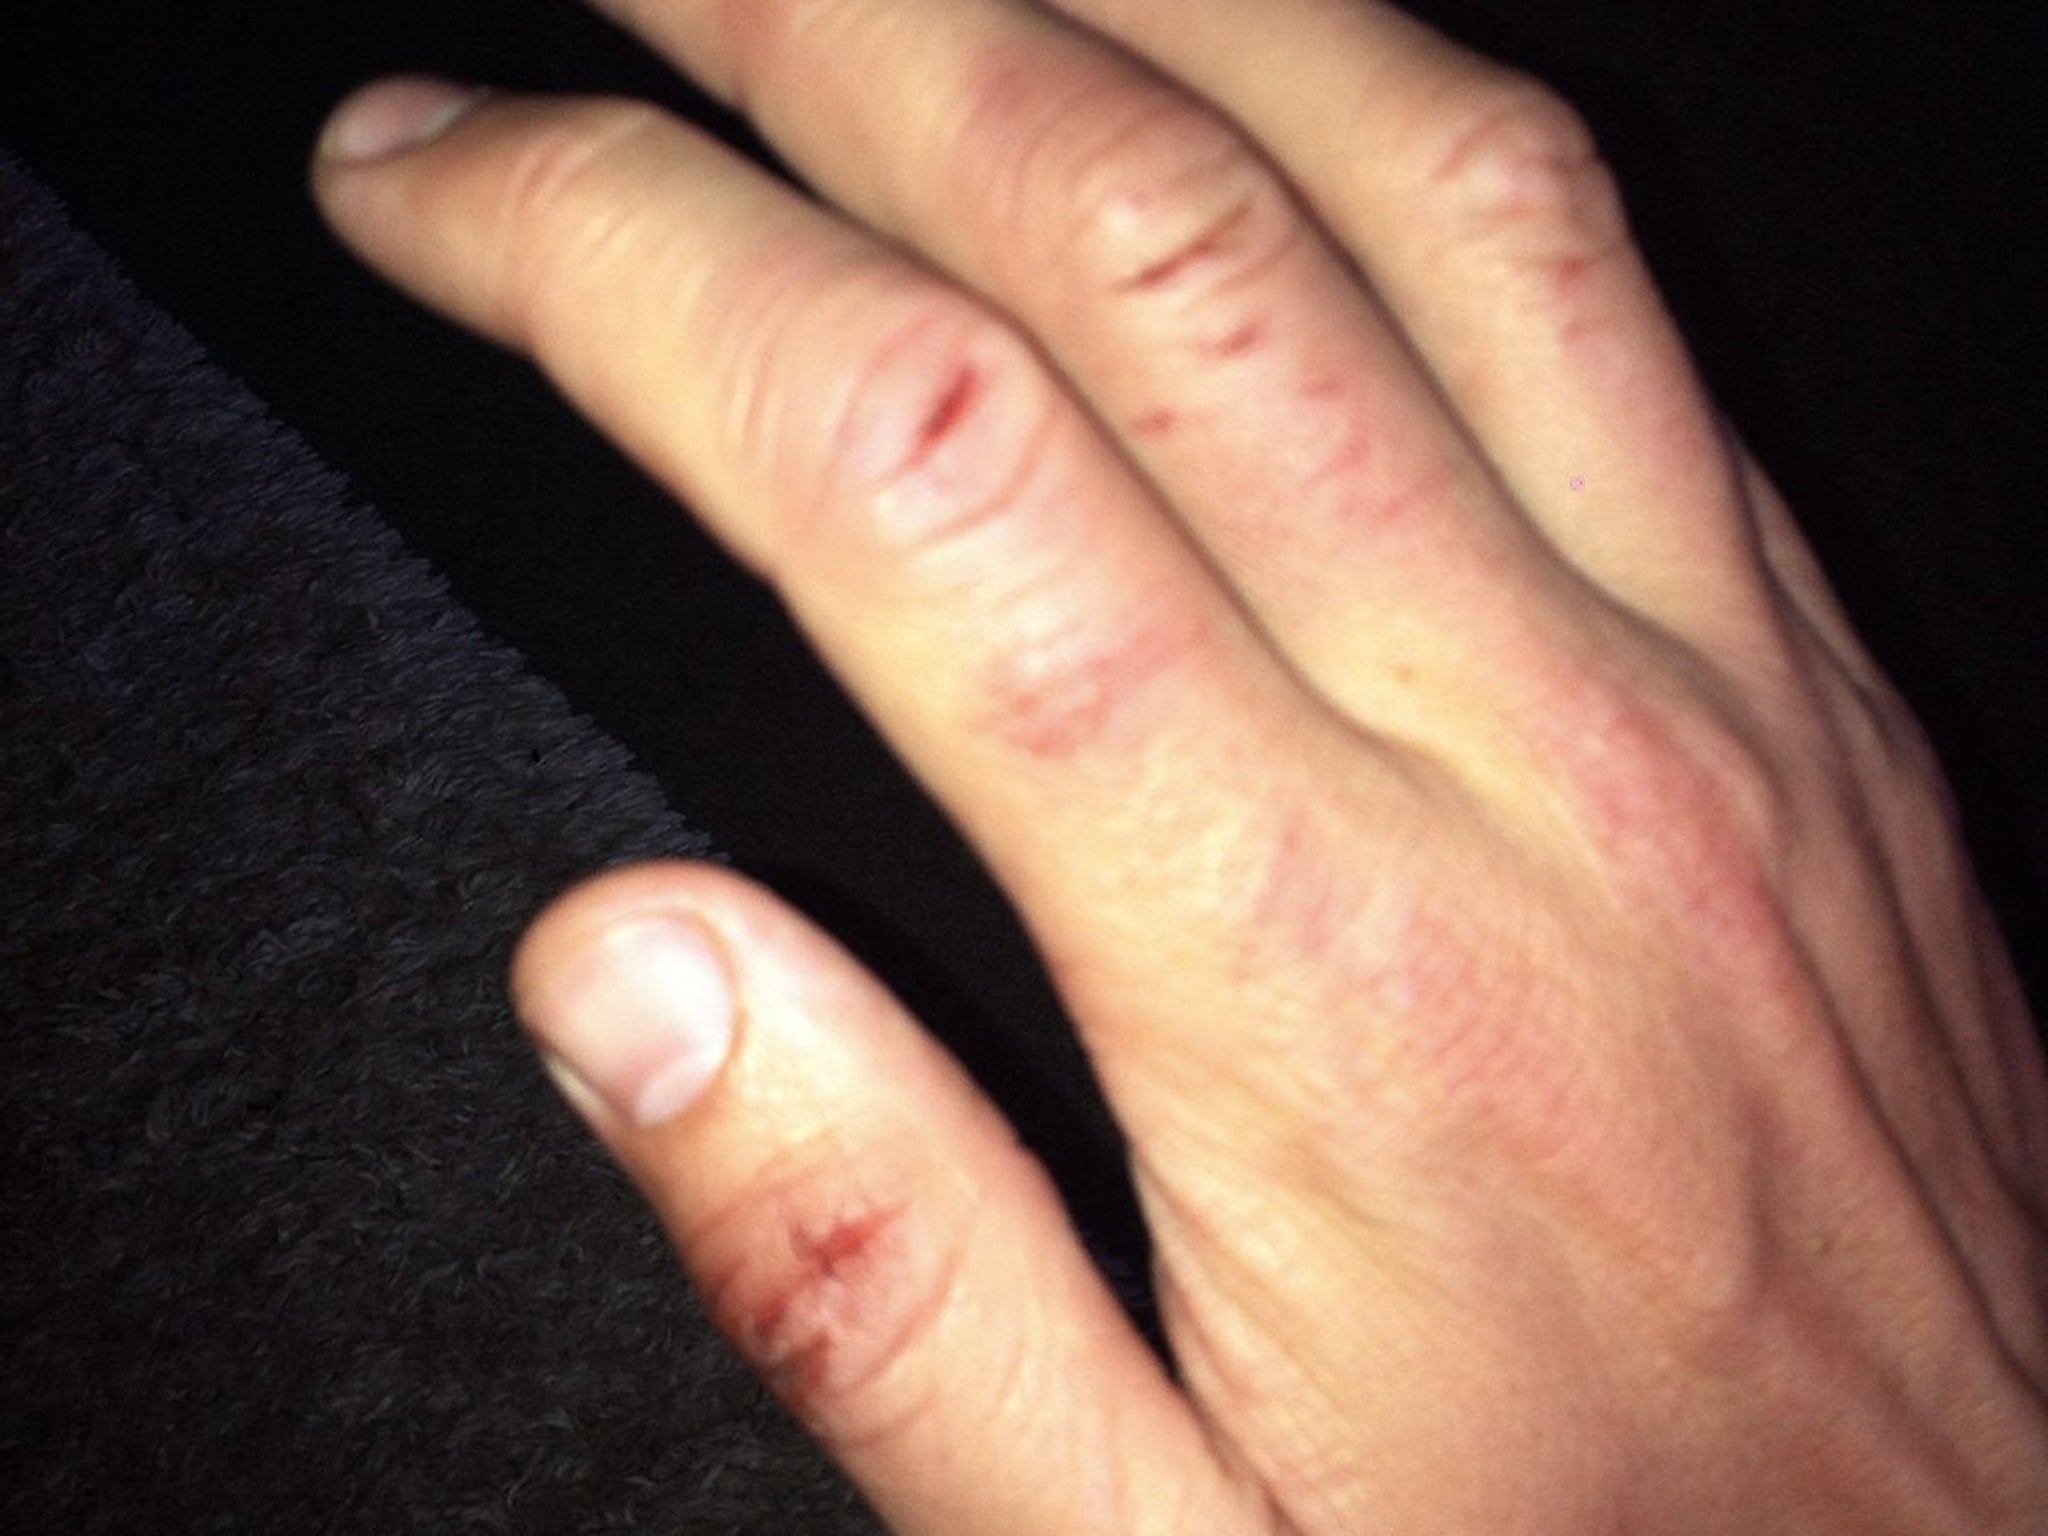 Injuries to the hand of surfer Rich Thomson, who has described how he hit a shark on the head after it bit him while he was in the water off Bantham in South Devon